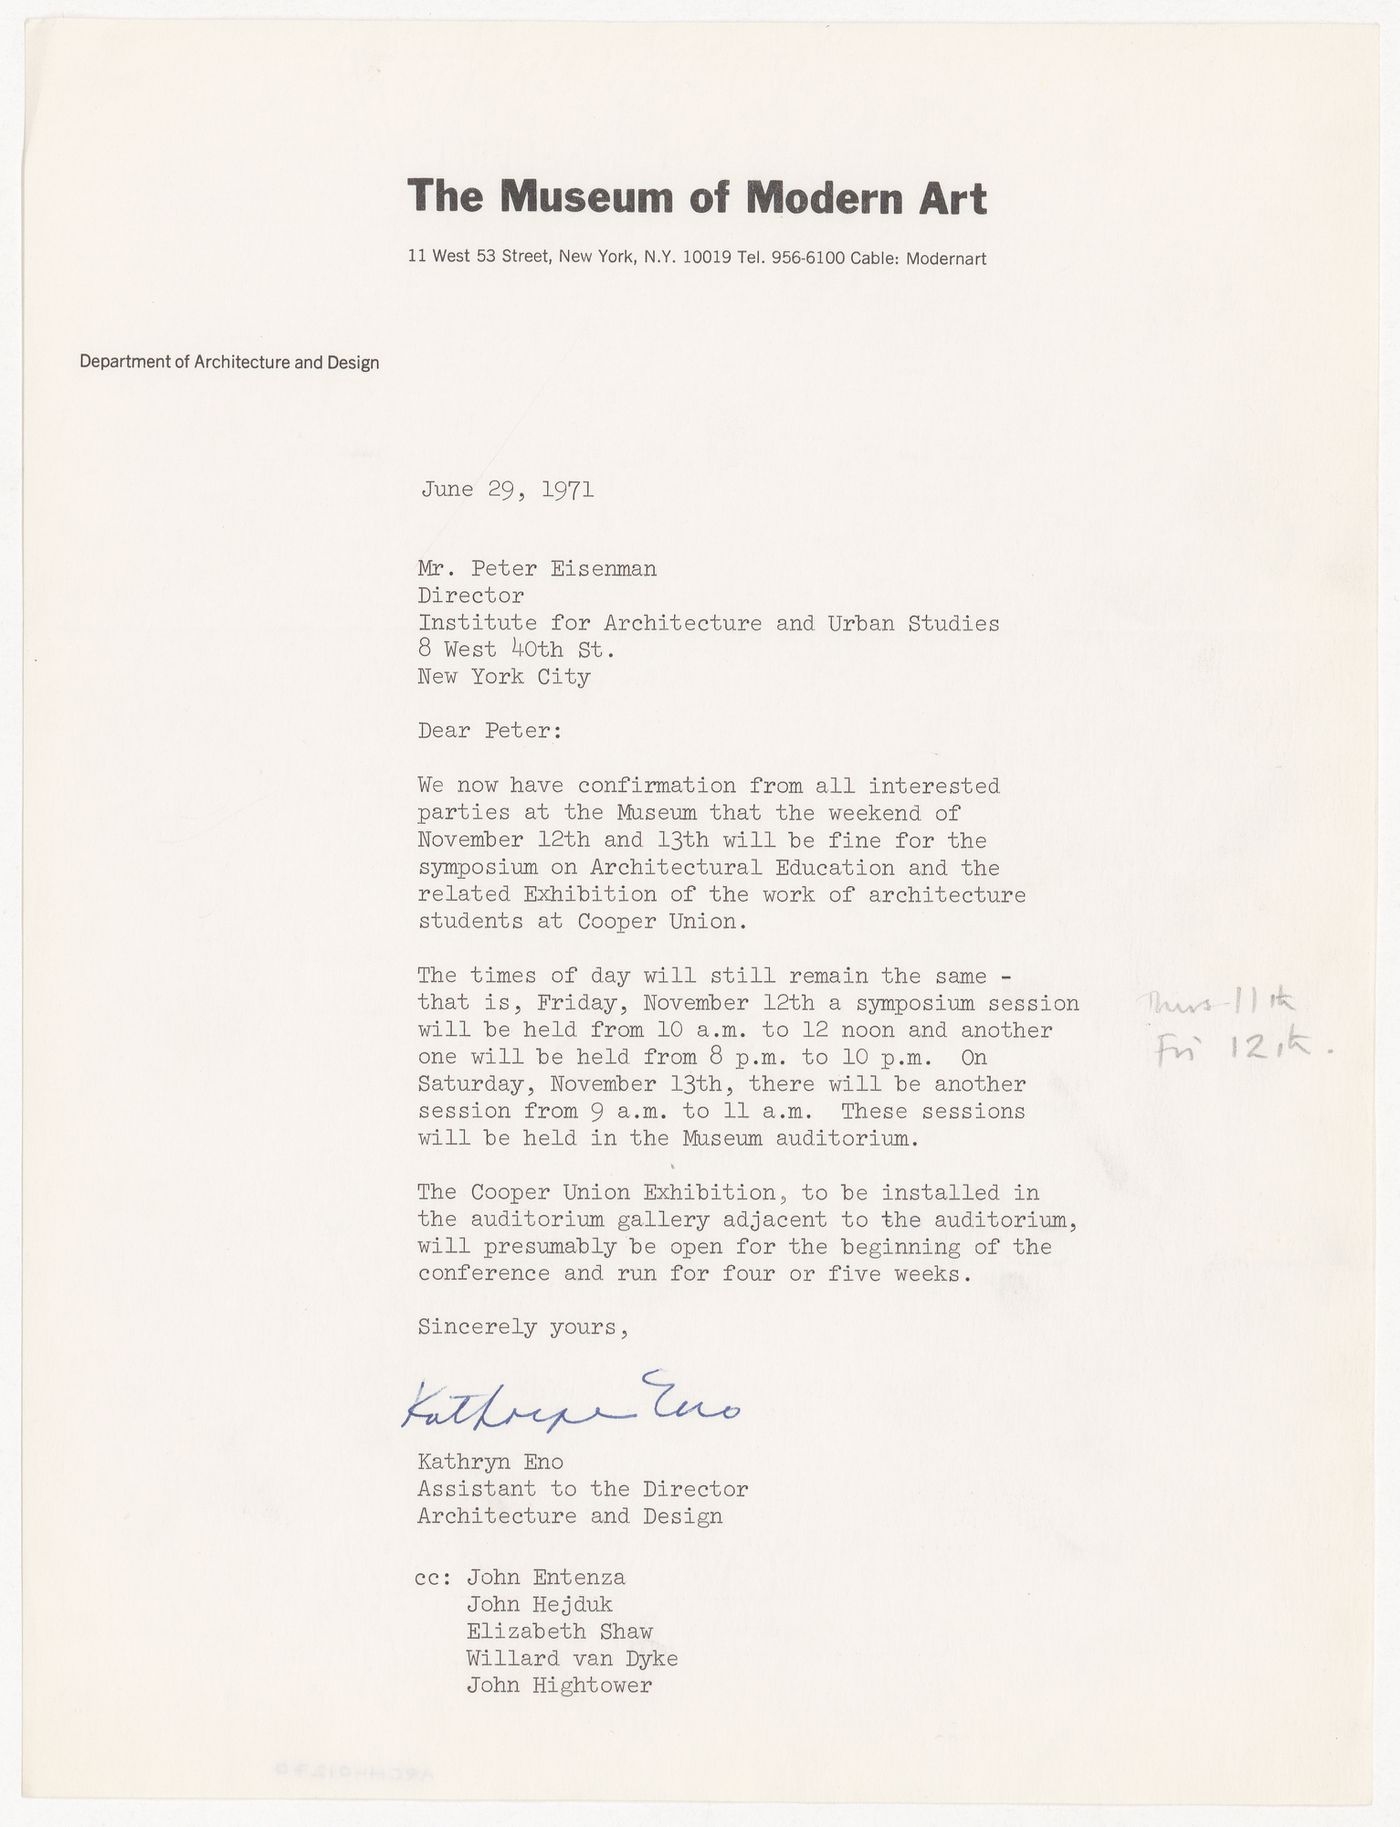 Letter from Kathryn Eno to Peter D. Eisenman about schedule for a symposium at The Museum of Modern Art (MOMA)